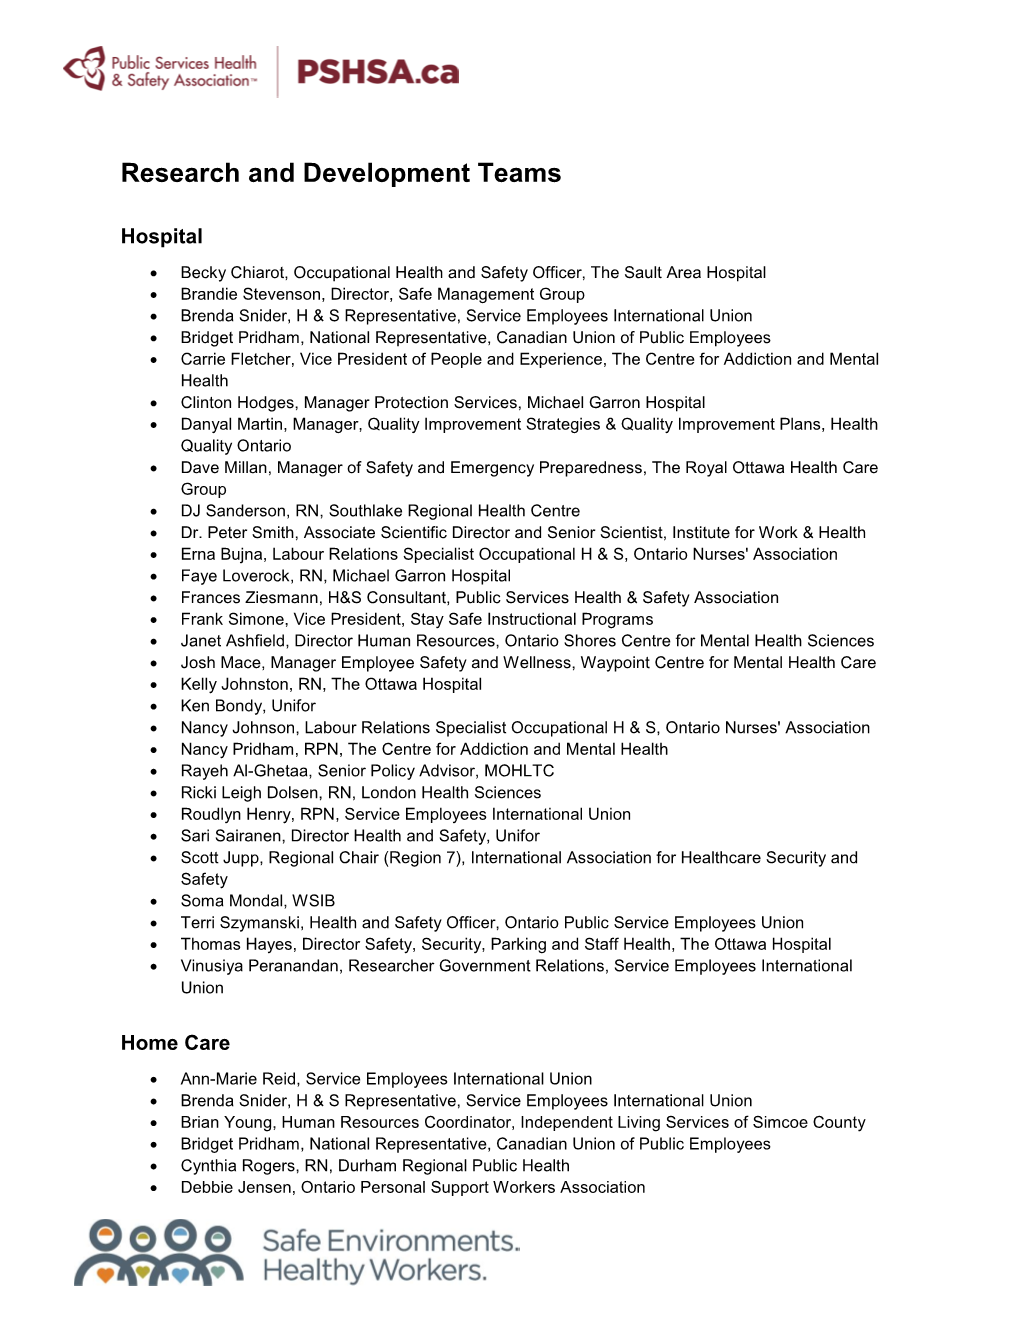 Research and Development Teams